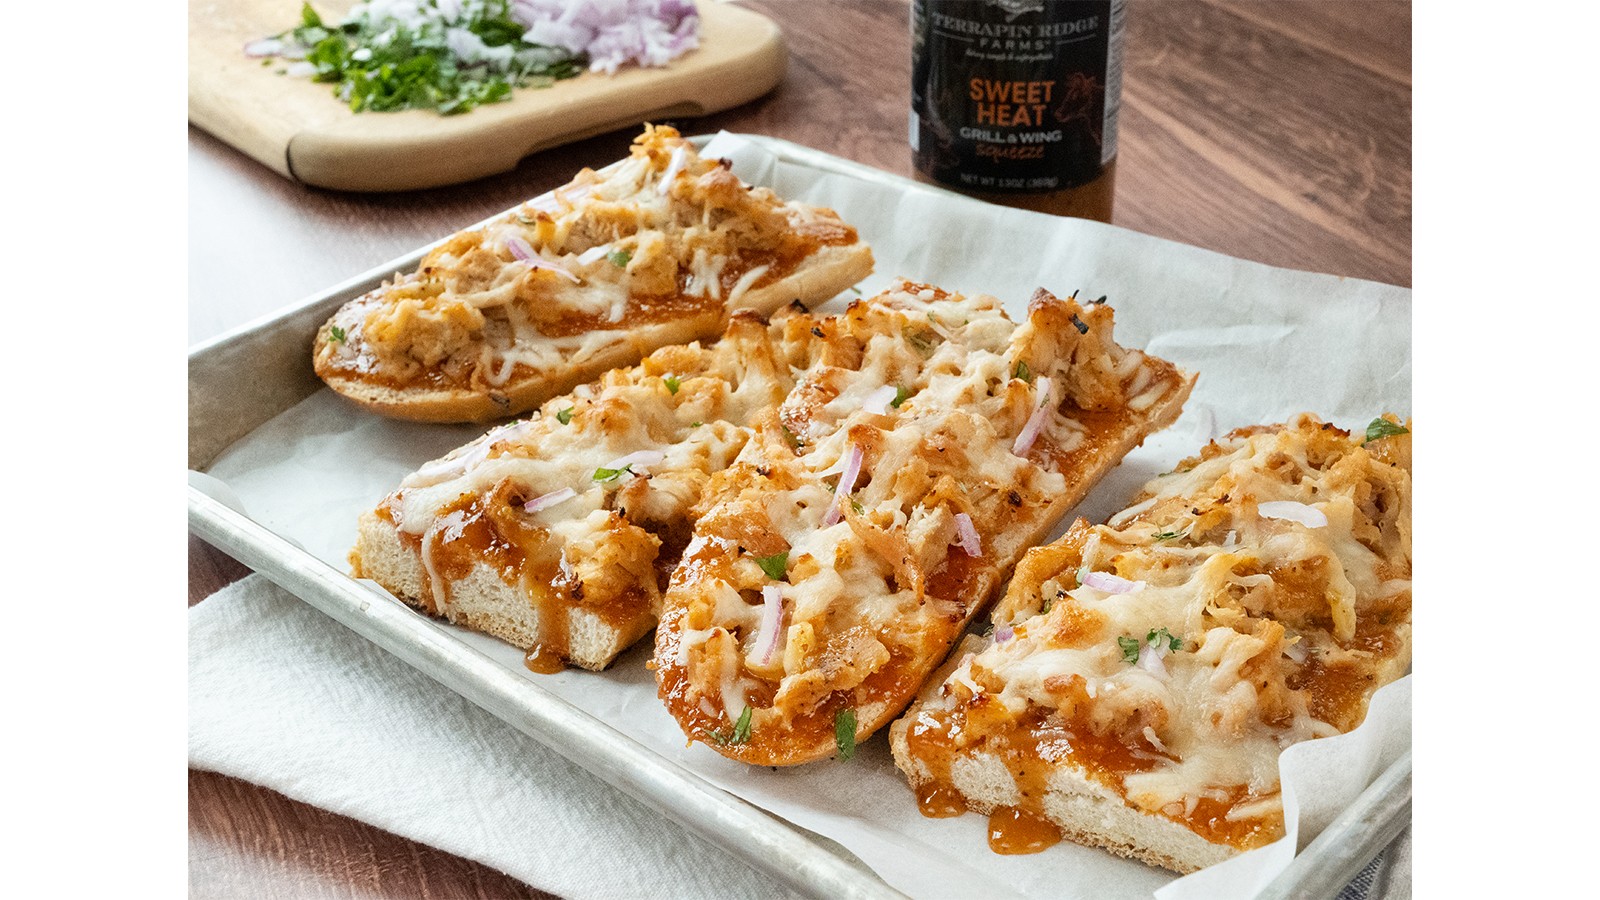 Image of French Bread BBQ Chicken Pizza